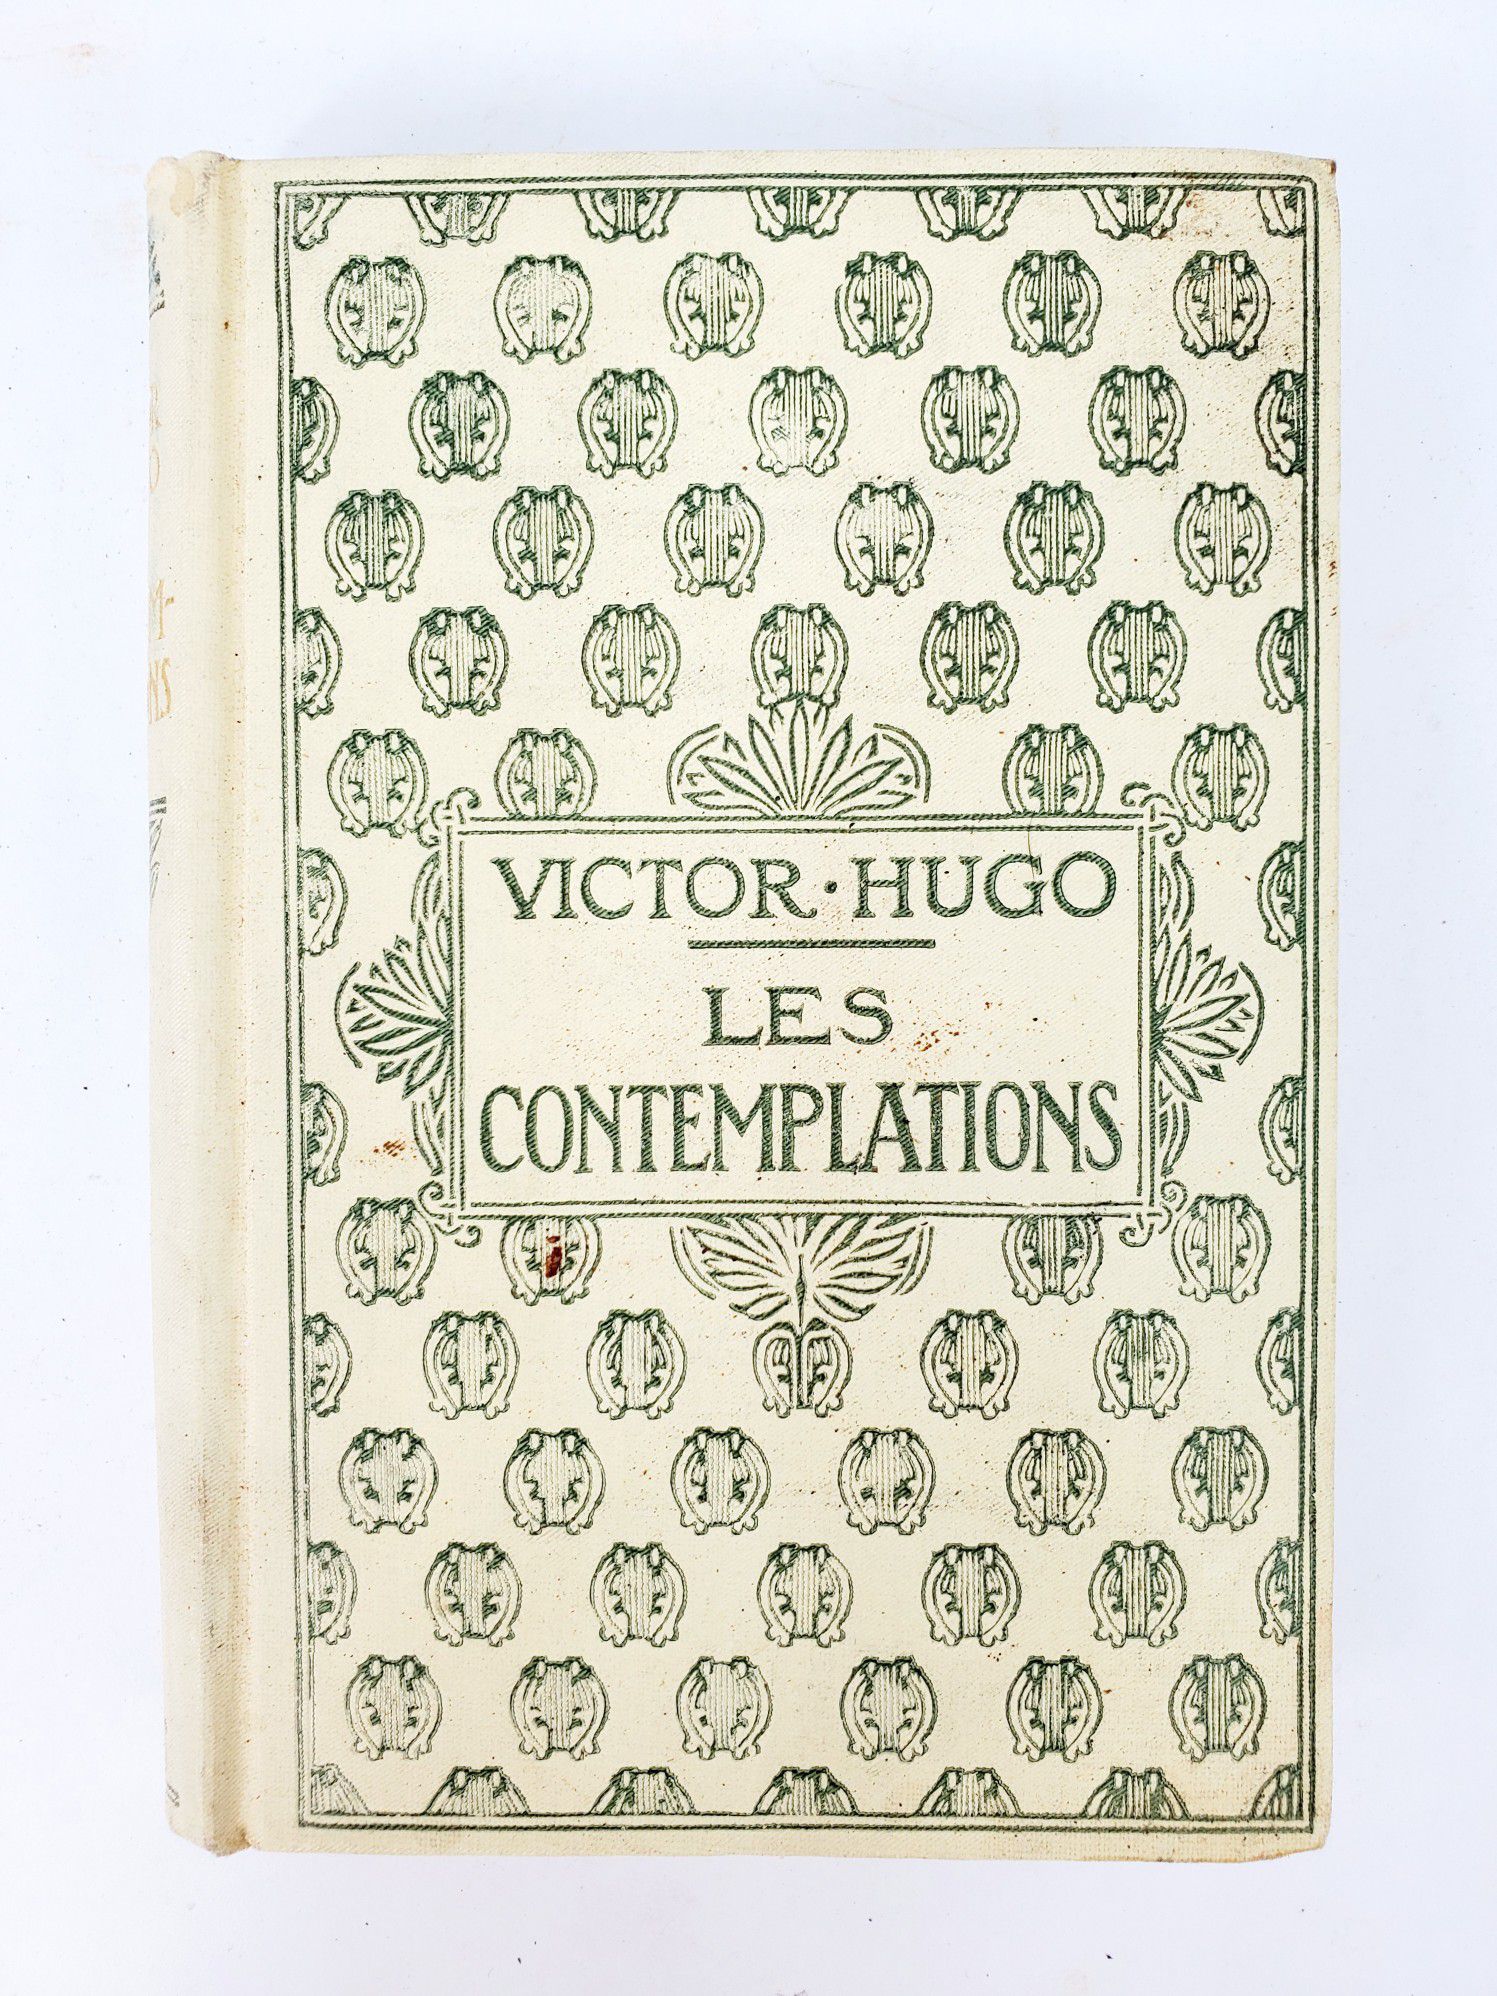 Les Contemplation by Victor Hugo in French - Hardcover Nelson Editors, Paris (circa 1930)